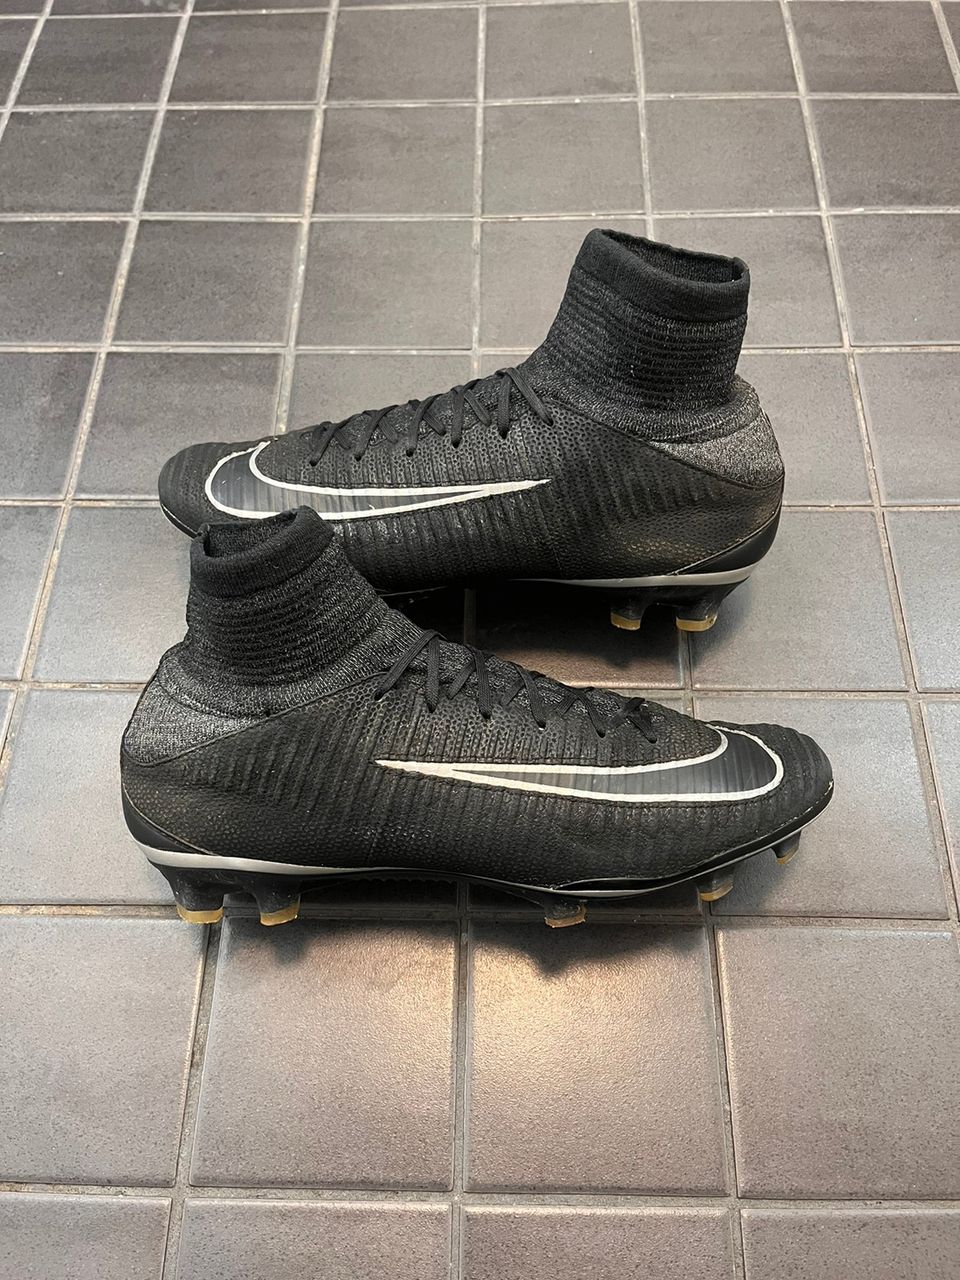 Nike Mercurial Superfly V Leather FG